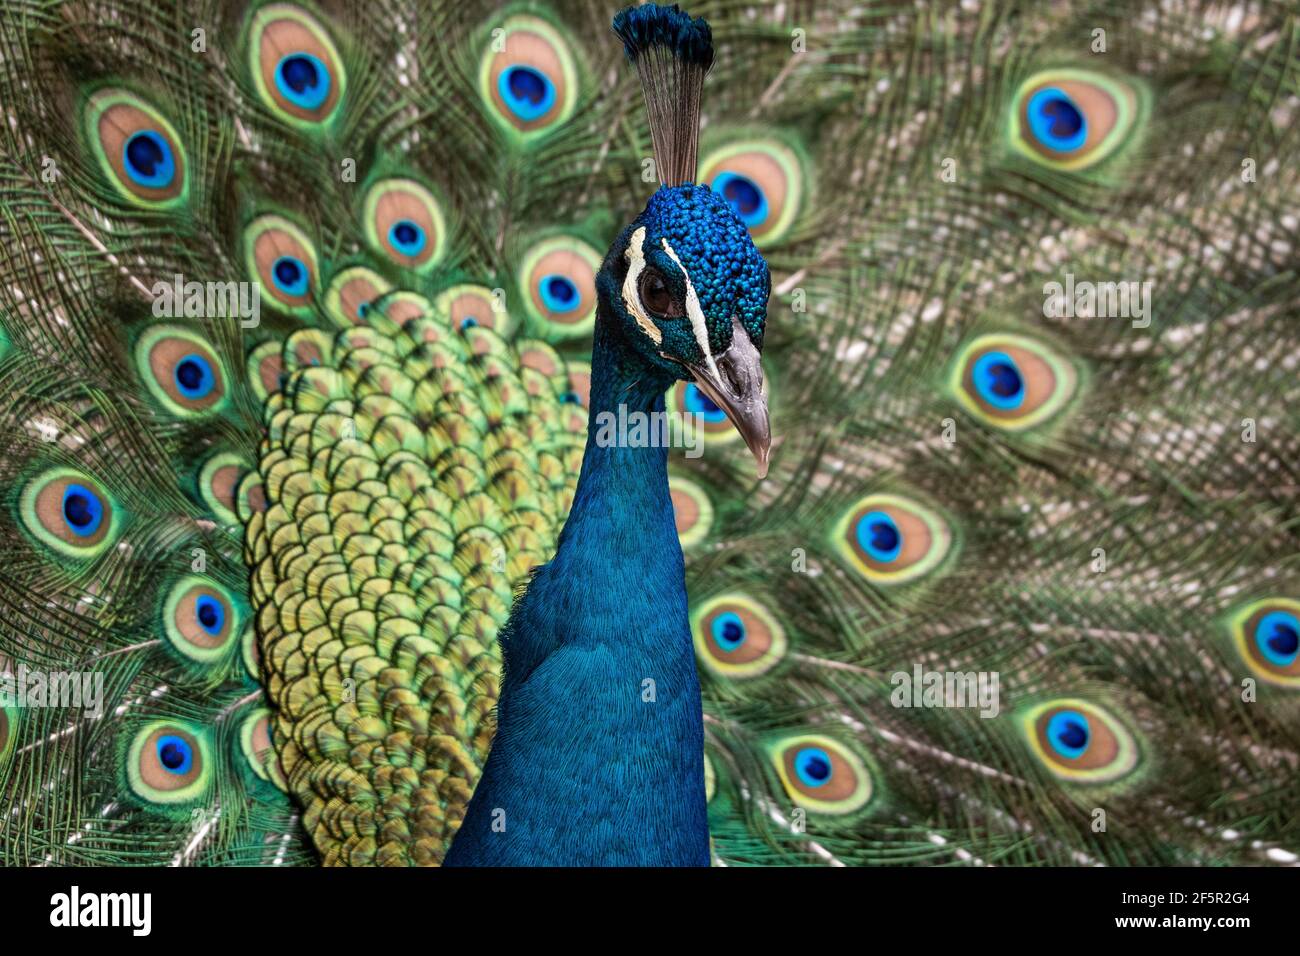 Madrid, Spain. 27th Mar, 2021. A male peacock (Pavo cristatus) showing its  colorful feathers pictured in the Madrid Zoo. The Madrid Zoo has today  registered a large influx of public as people